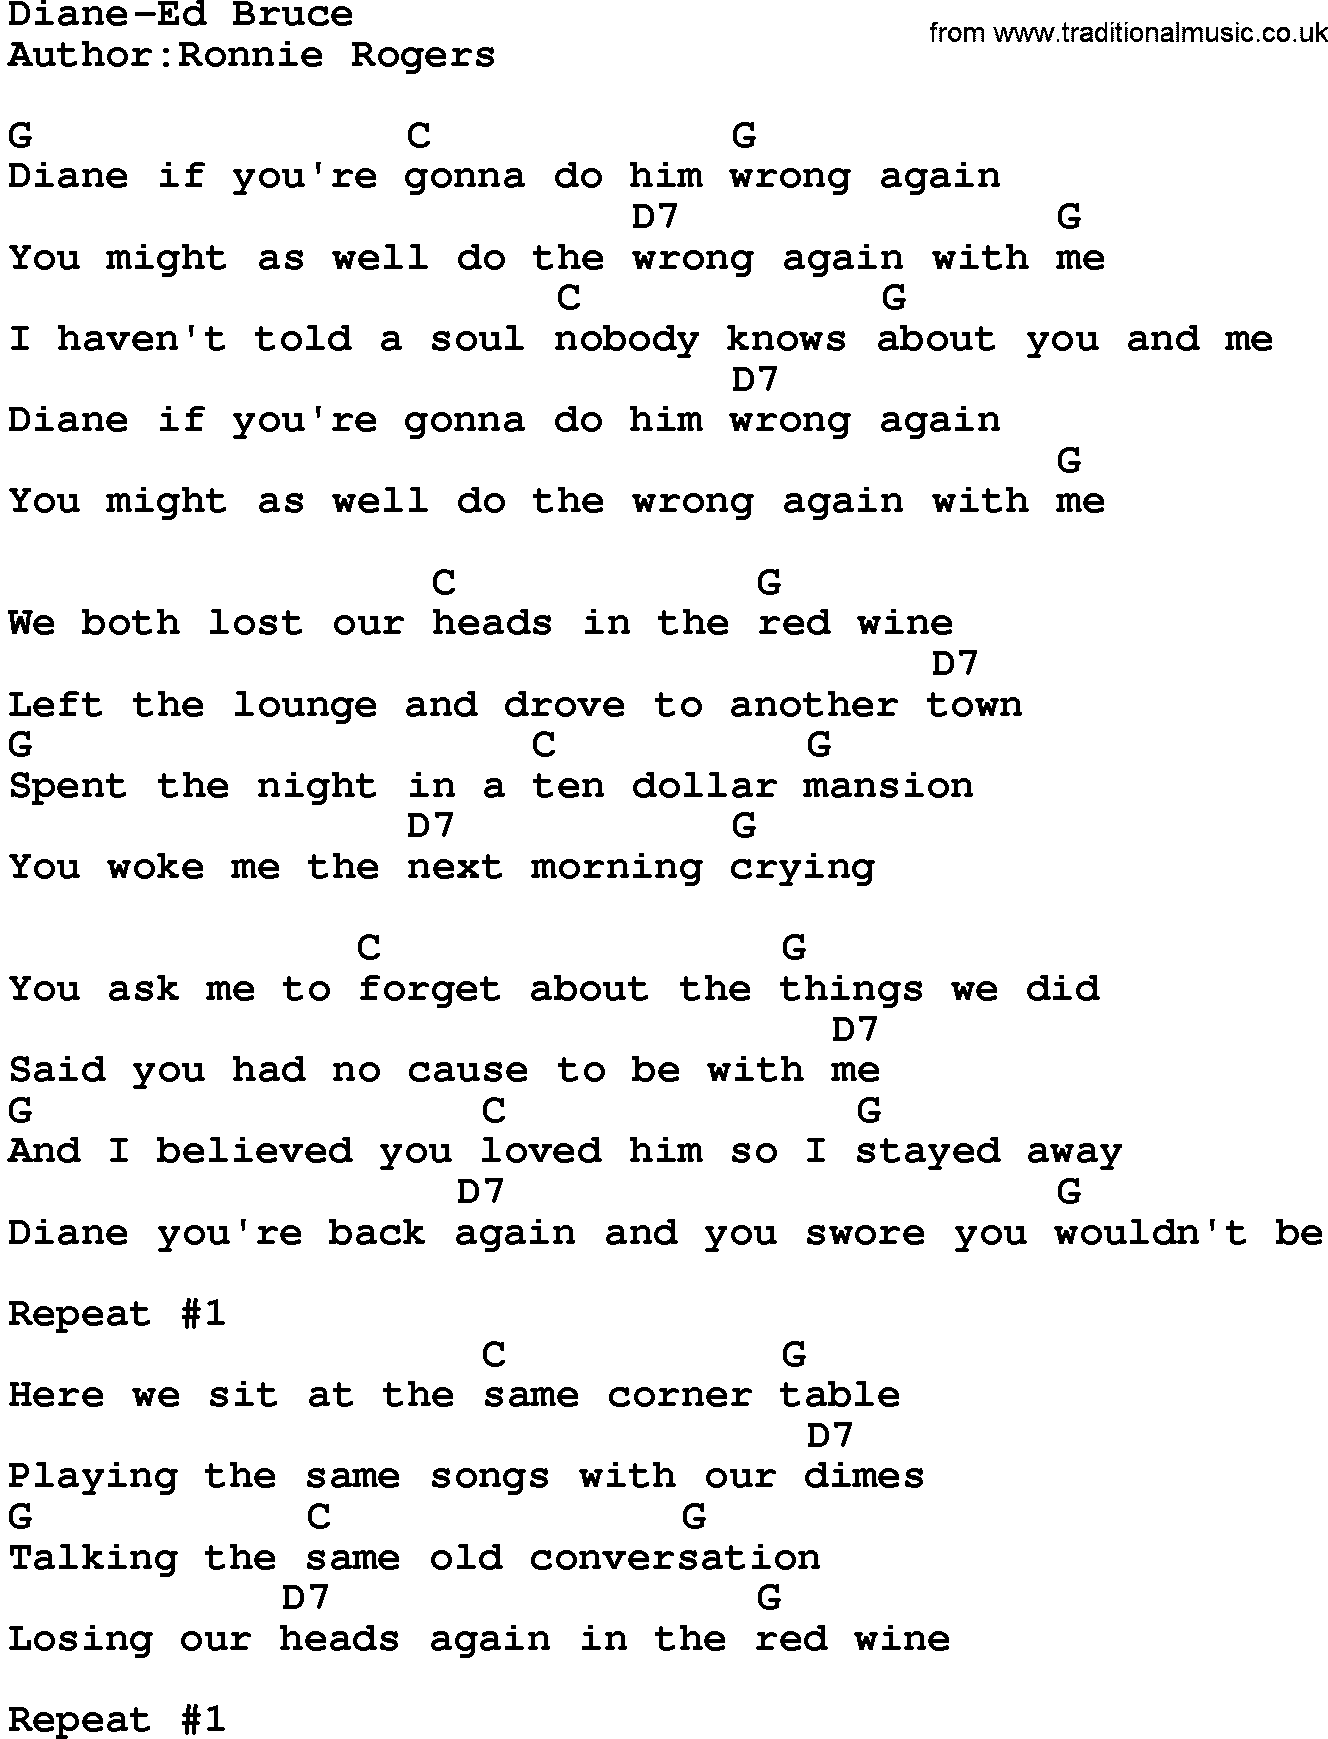 Country music song: Diane-Ed Bruce lyrics and chords